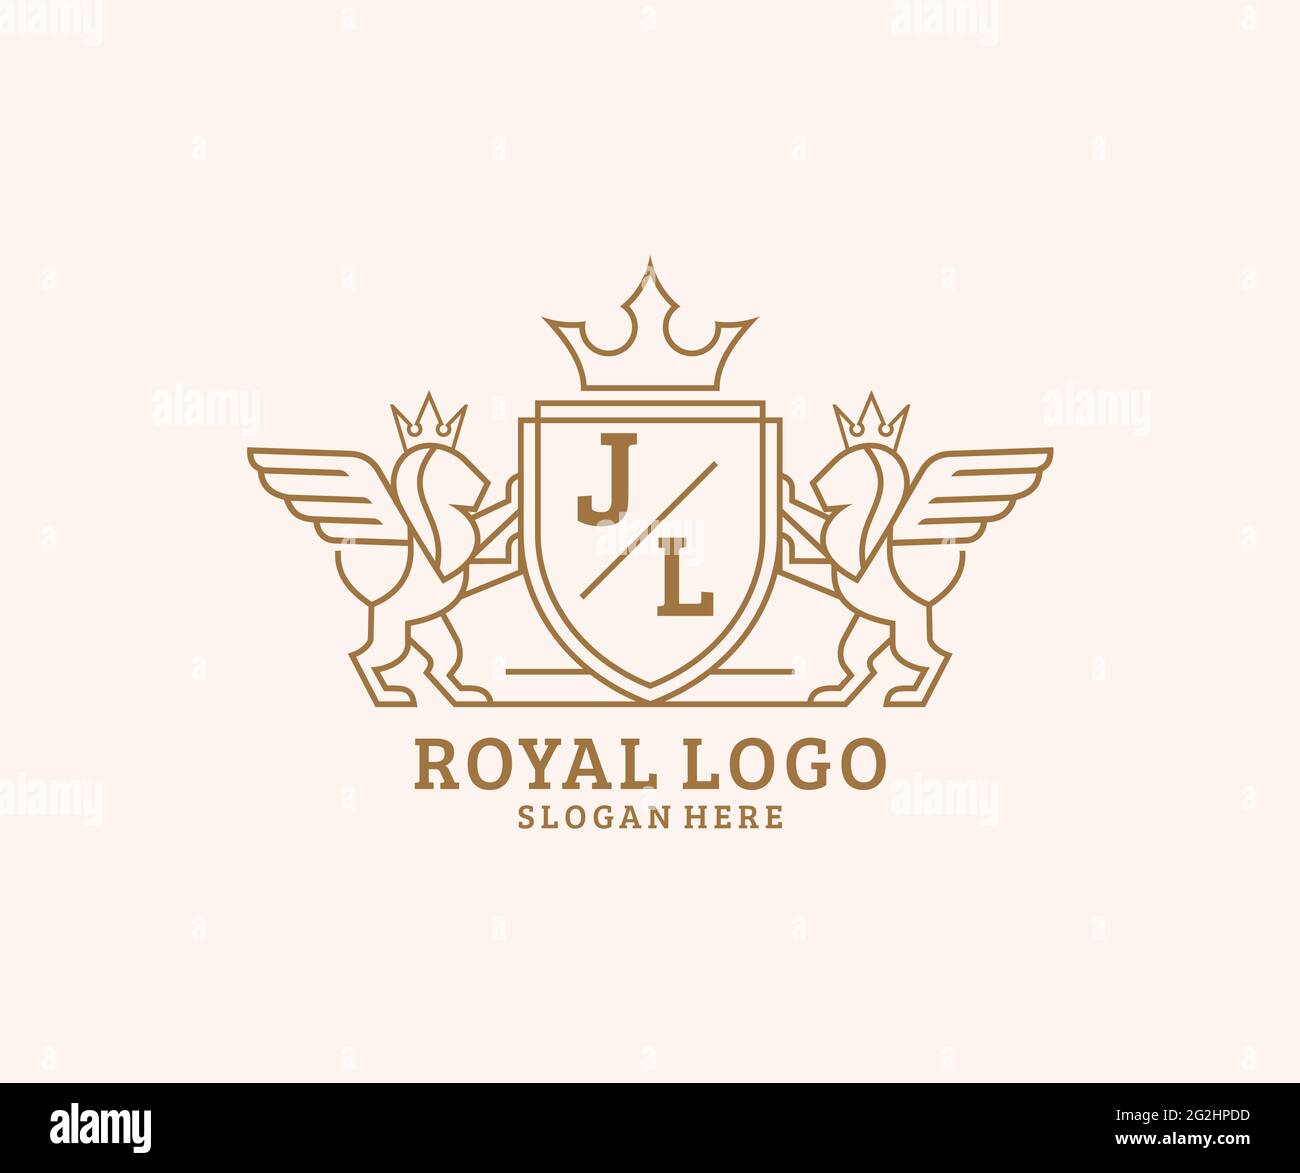 JL Letter Lion Royal Luxury Heraldic,Crest Logo template in vector art for Restaurant, Royalty, Boutique, Cafe, Hotel, Heraldic, Jewelry, Fashion and Stock Vector